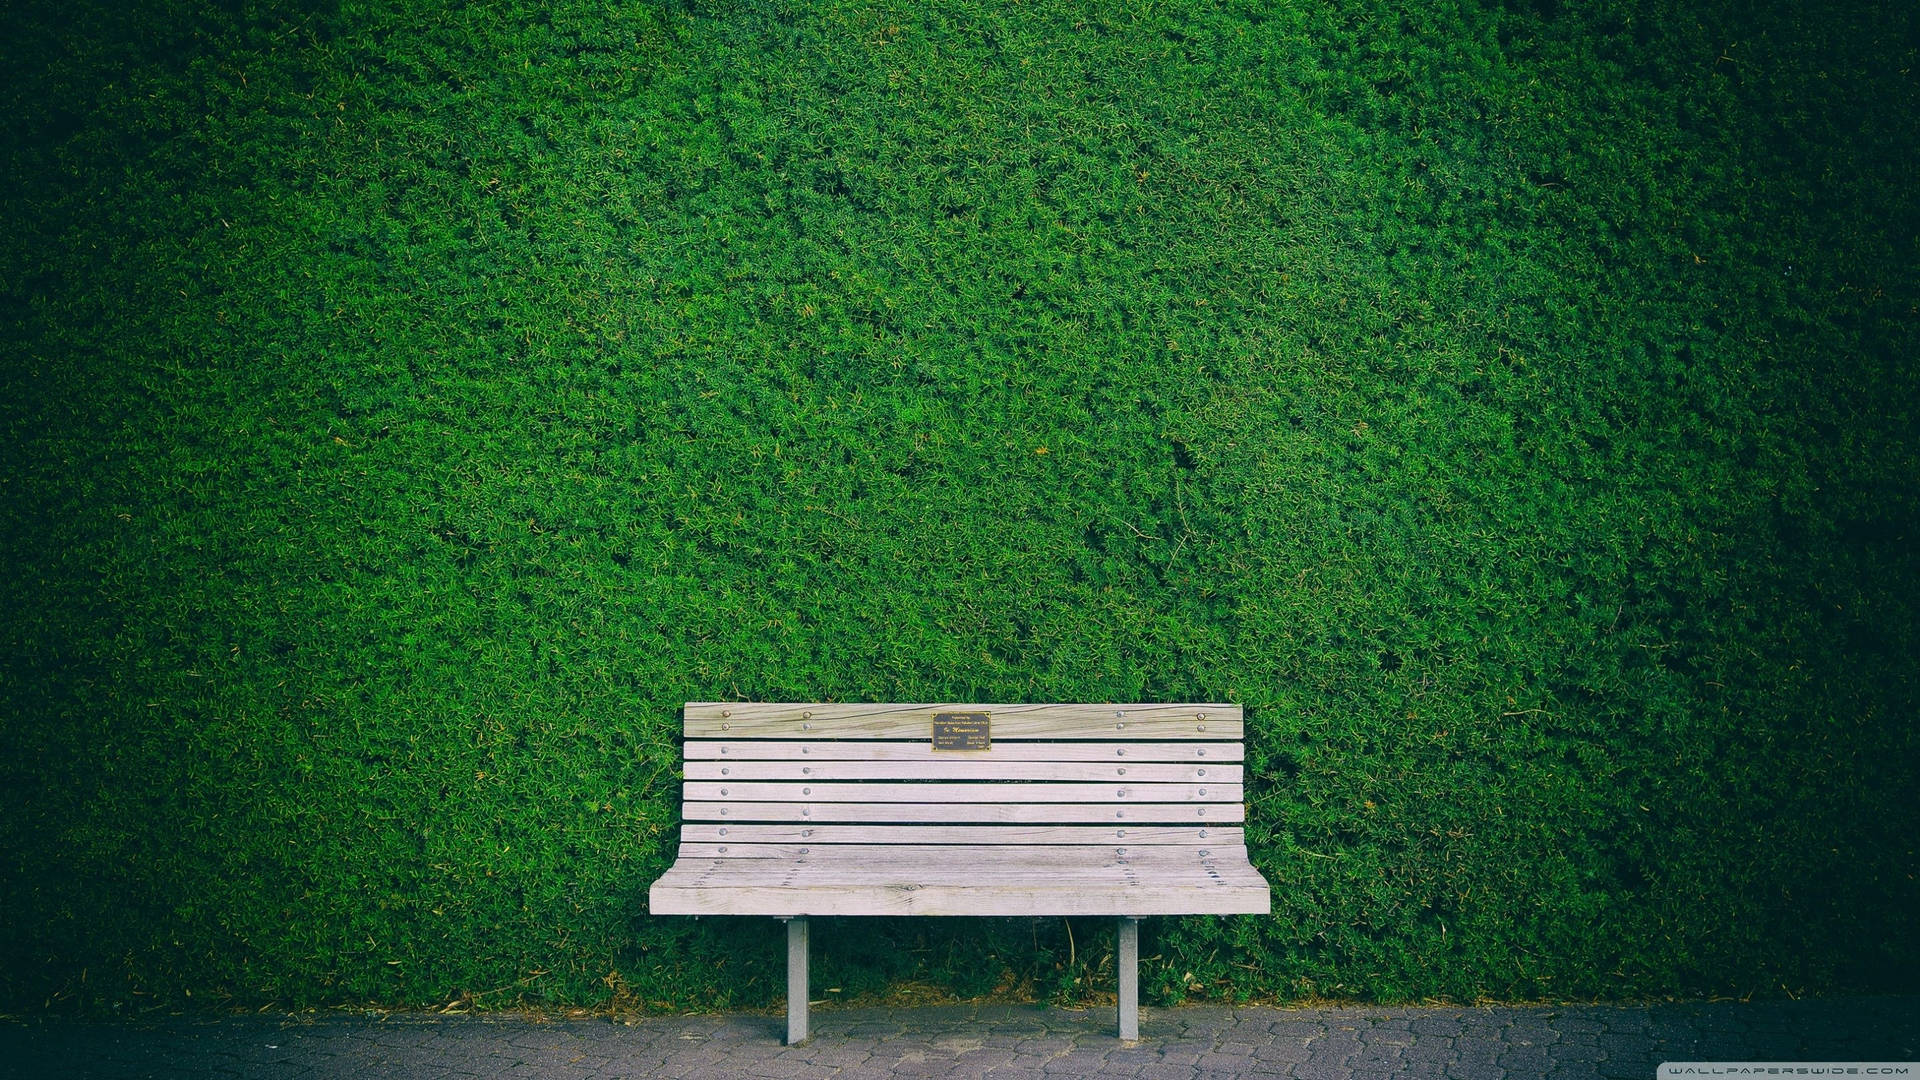 Solitary Bench Against A Mossy Green Wall Background